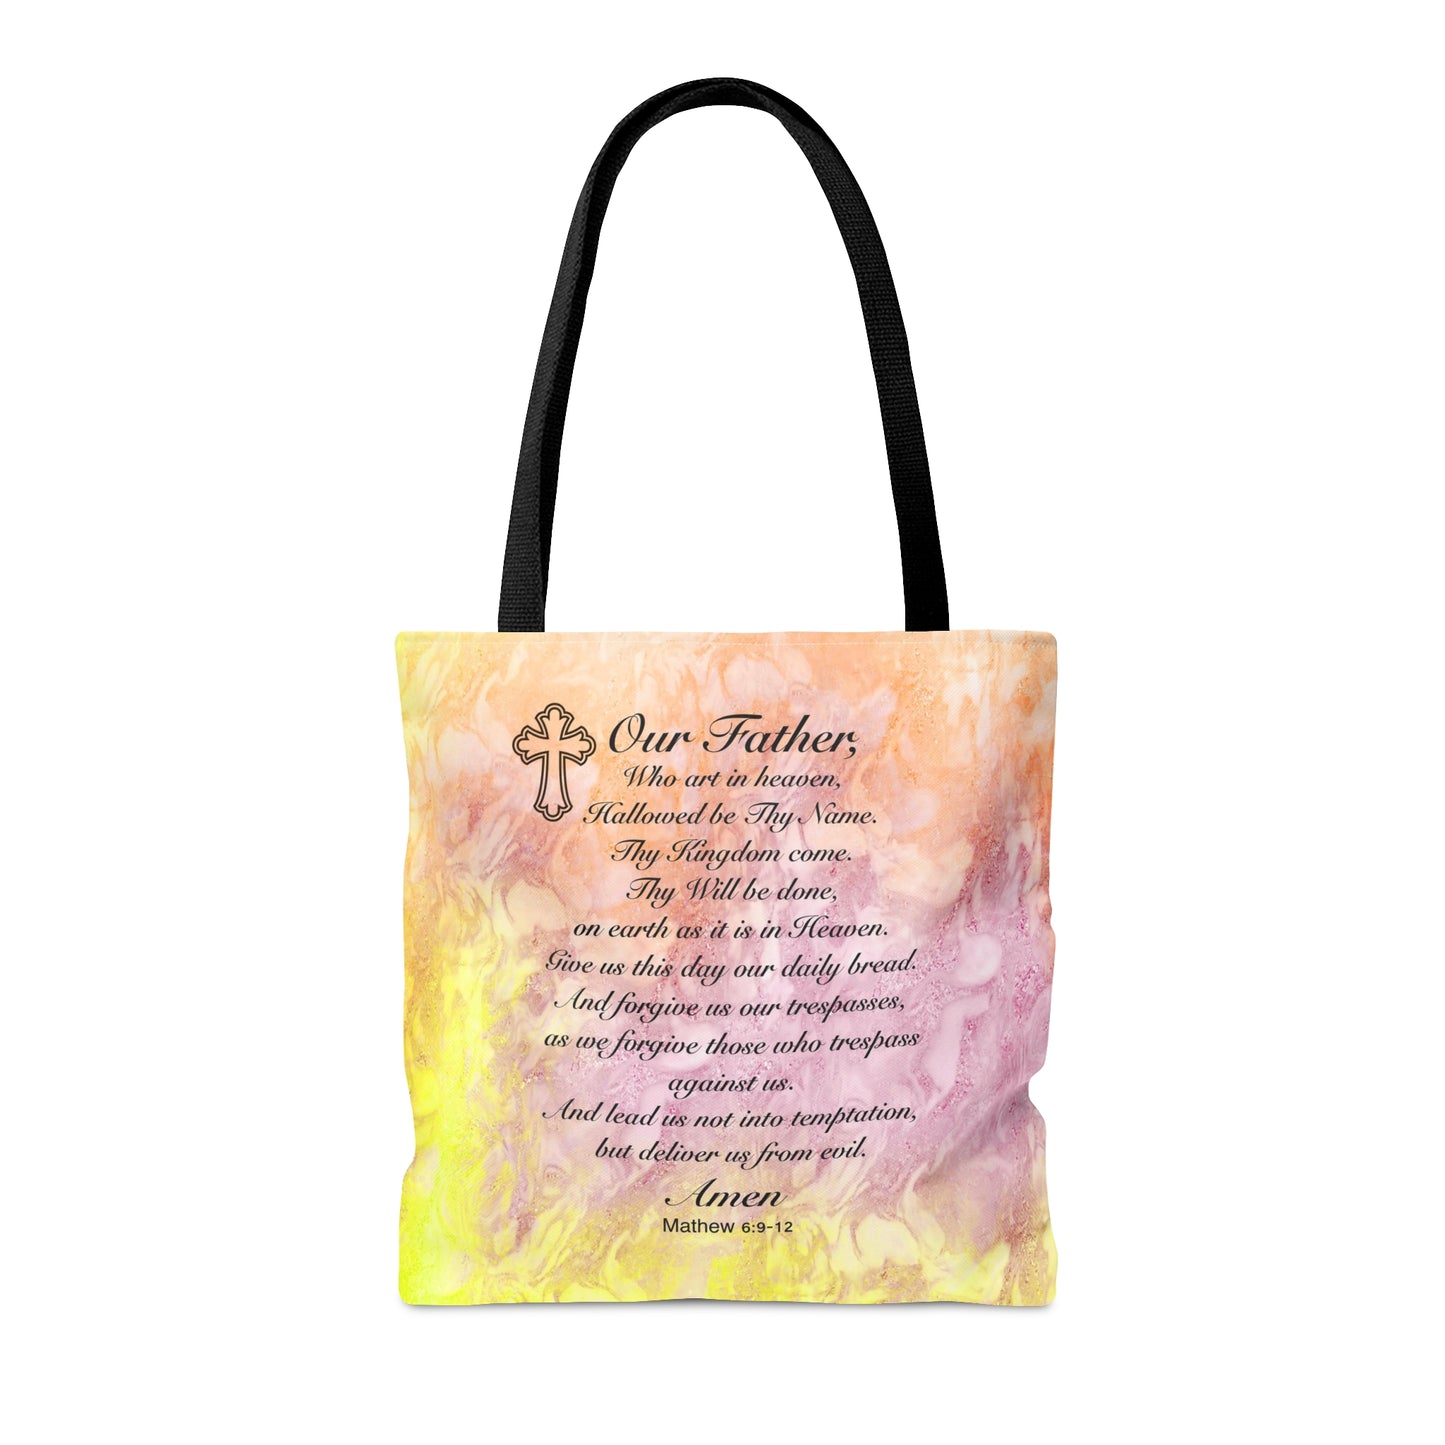 The Lord’s Prayer Strawberry Lemonade with Peach Tote Bag